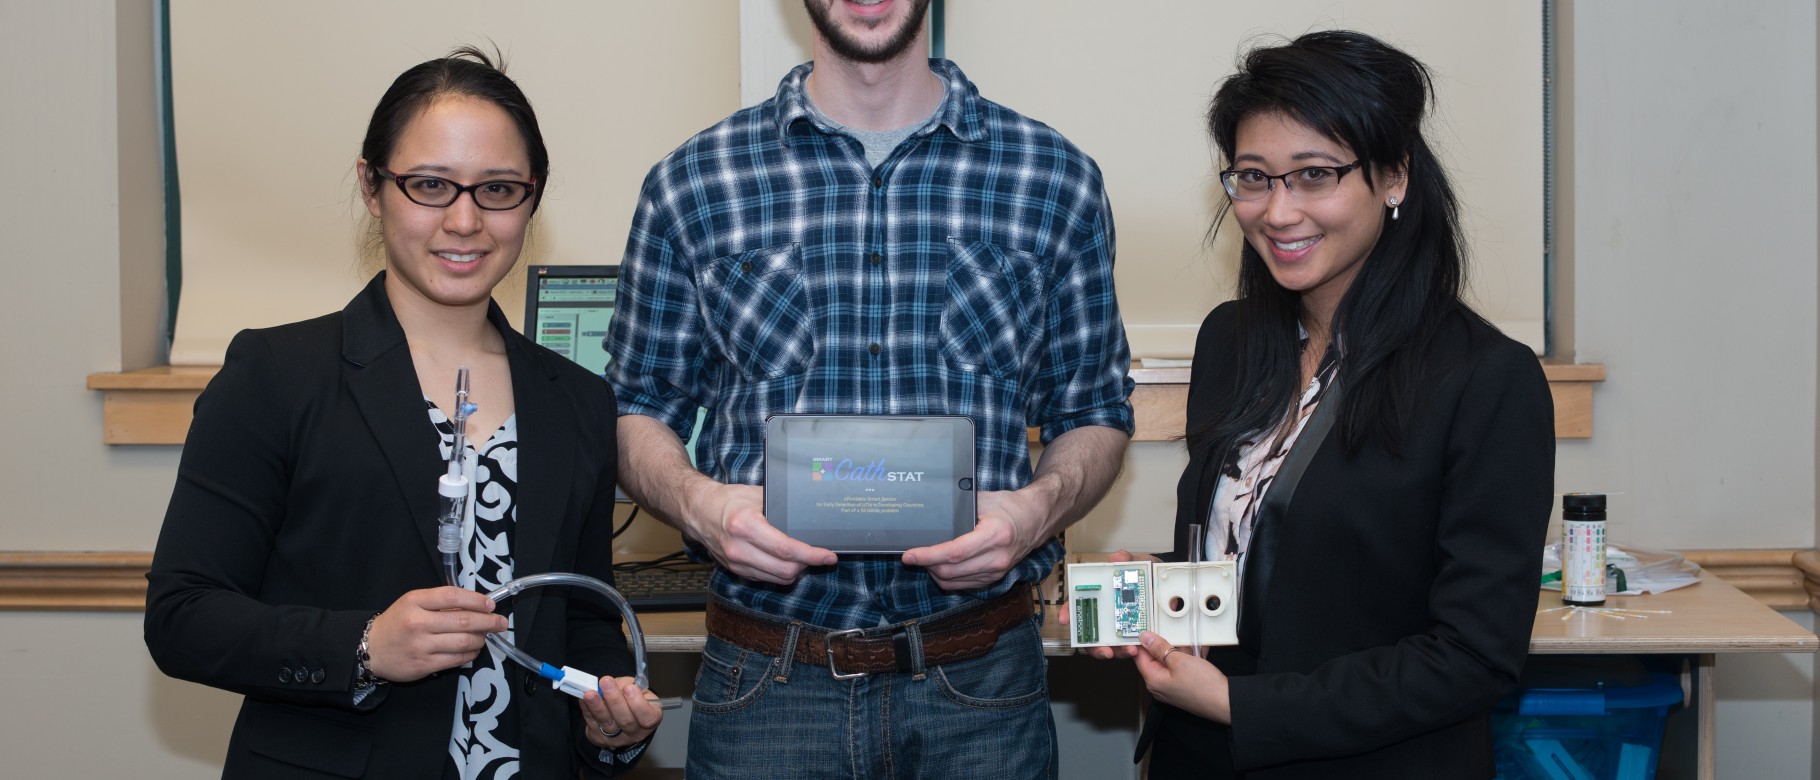 First place Innovation Challenge winners L-R: Sophia Chan, Daniel Morganielli and Tiffany Cheung